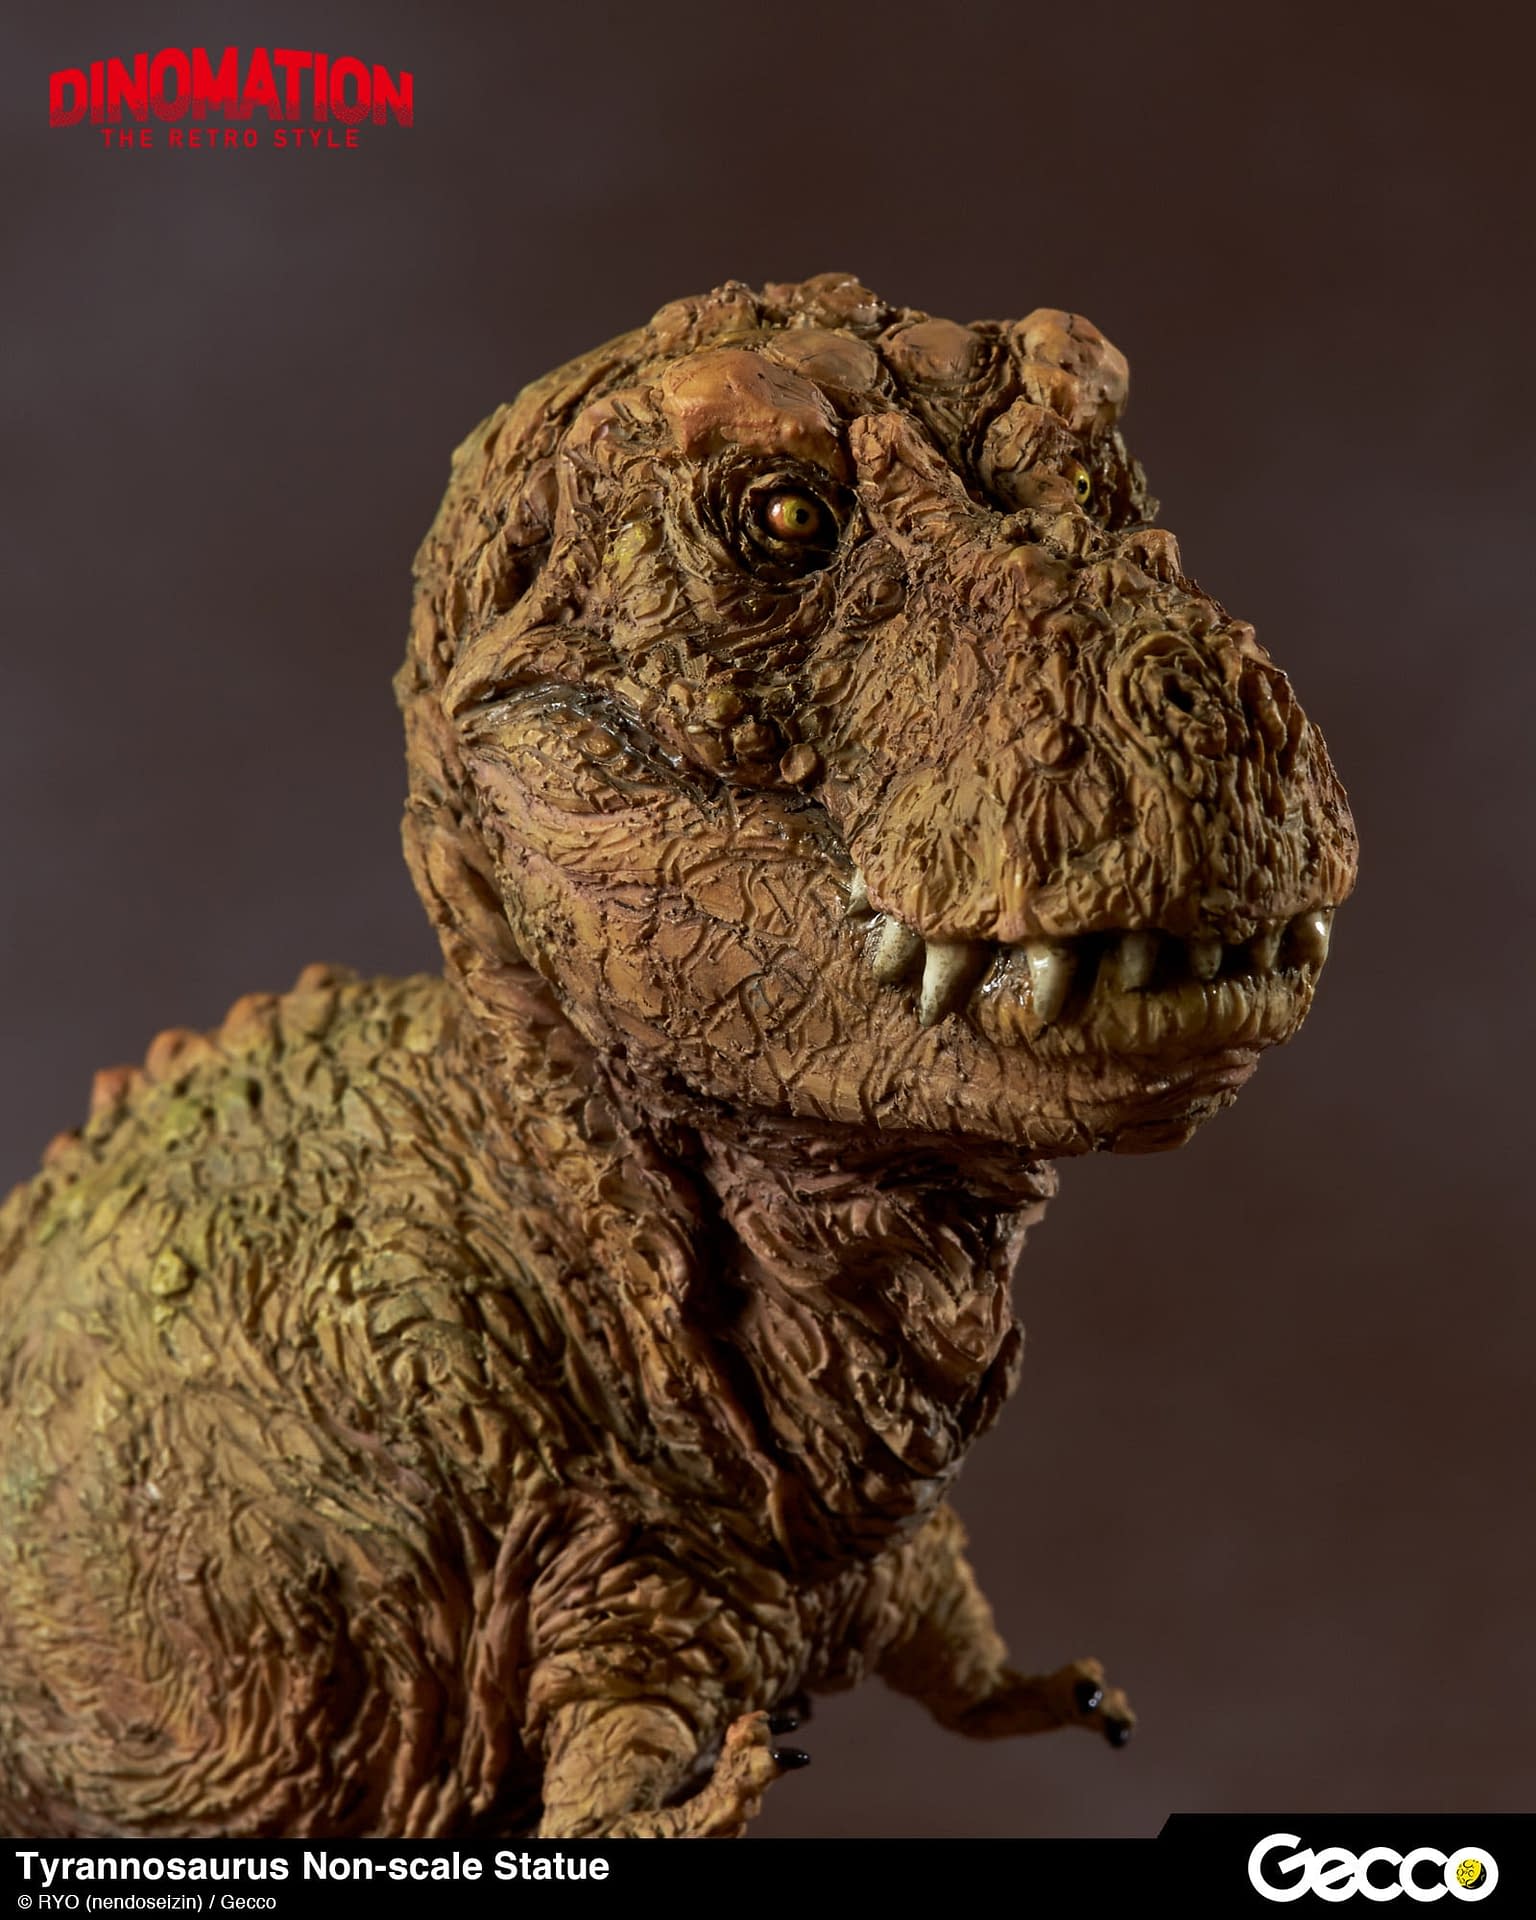 Gecco Brings Dinomation Back to Life with New Tyrannosaurus Rex Statue 